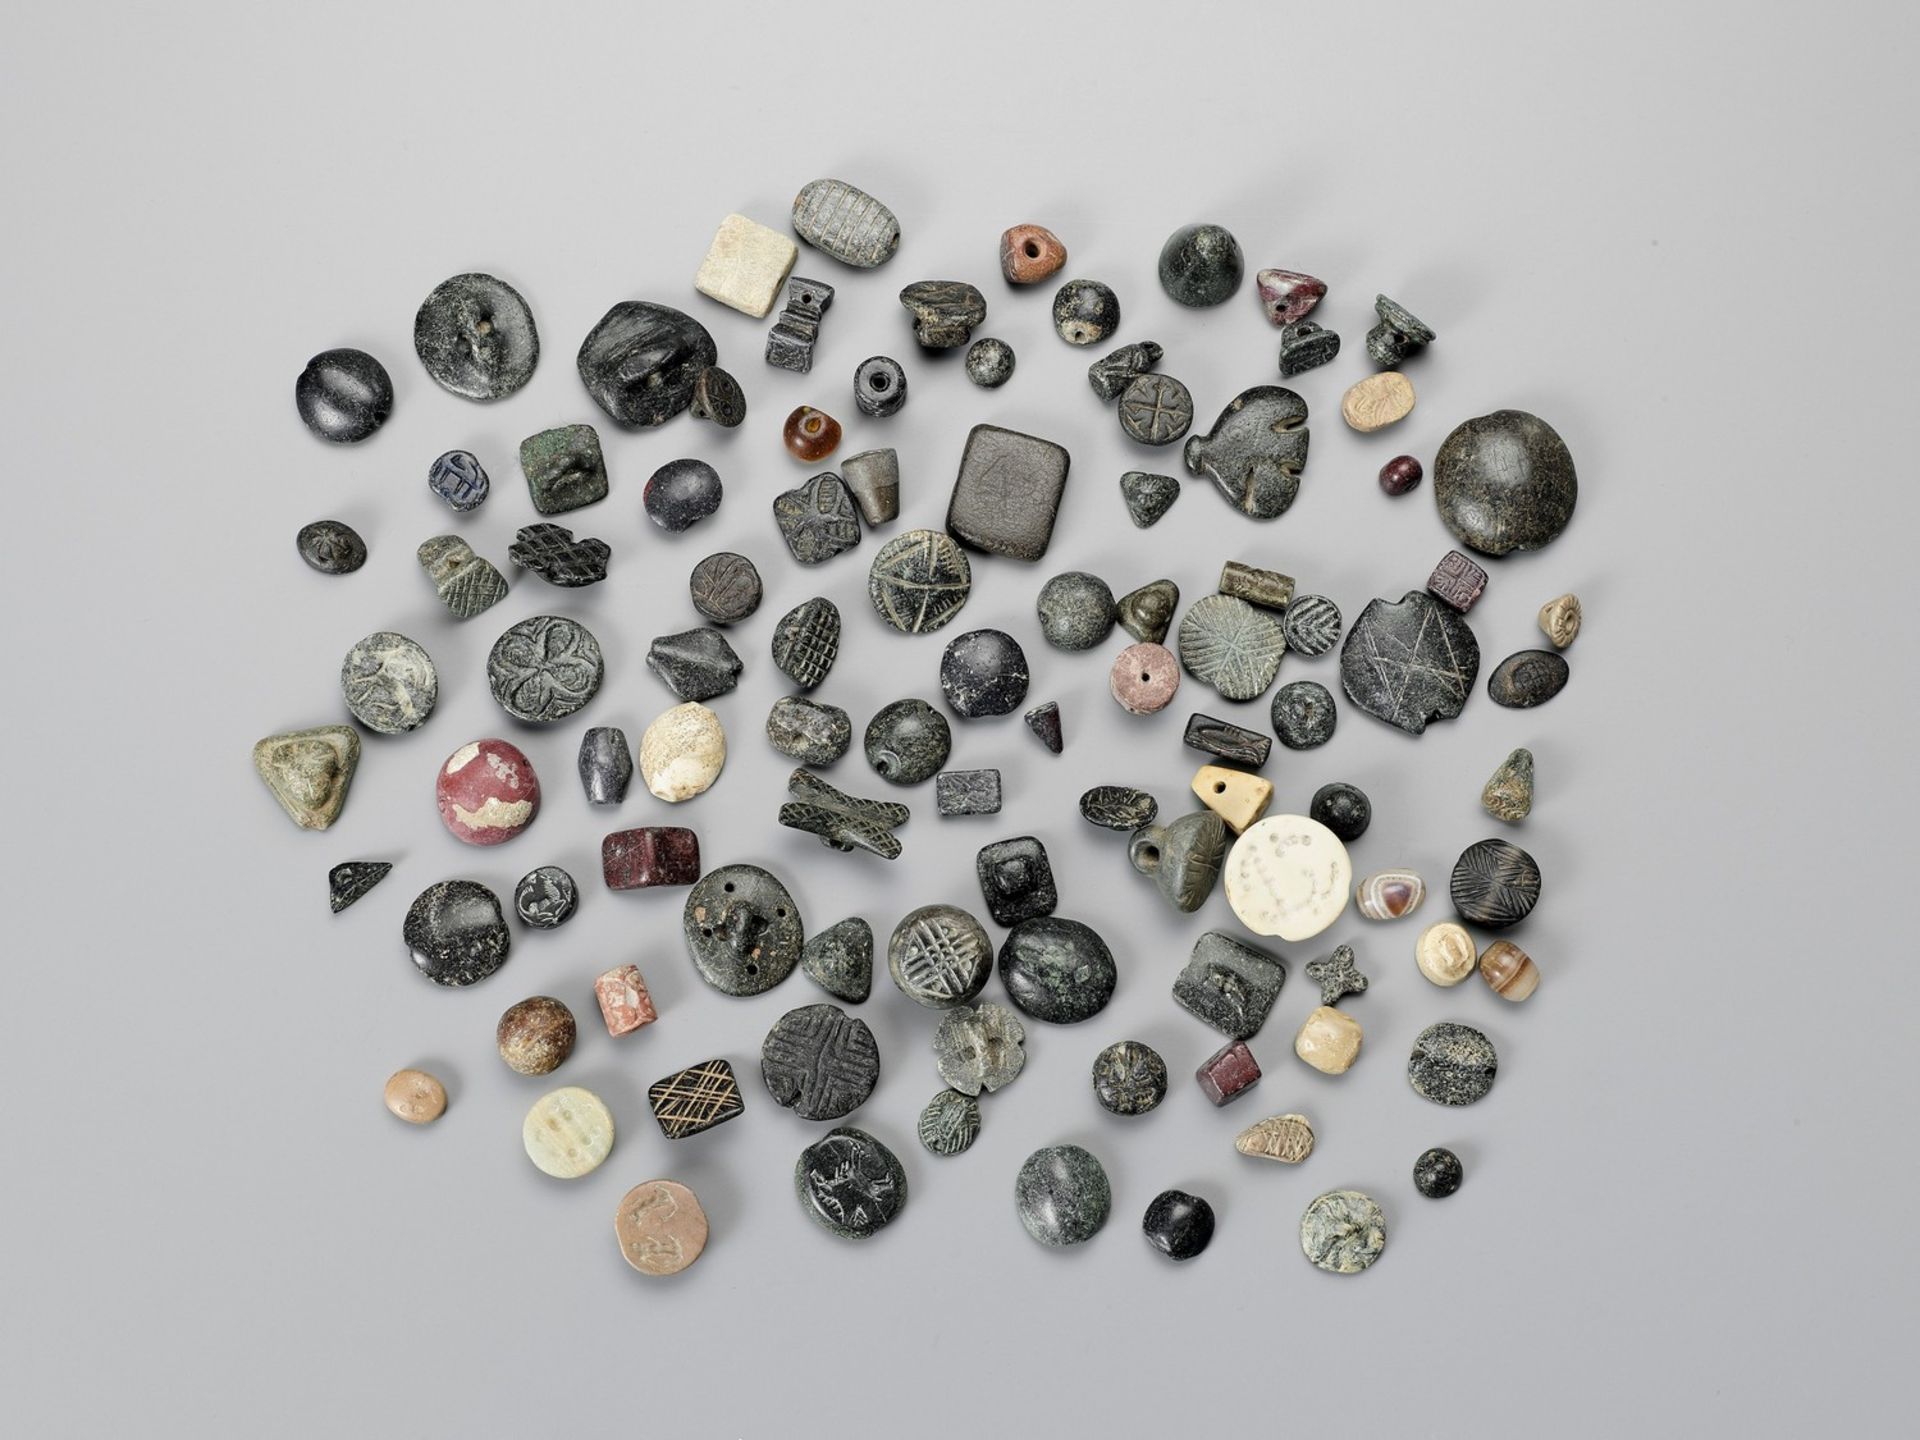 AN AMAZING COLLECTION OF 101!!! NEAR EAST ANCIENT SEALS AND BEADS - Image 4 of 4